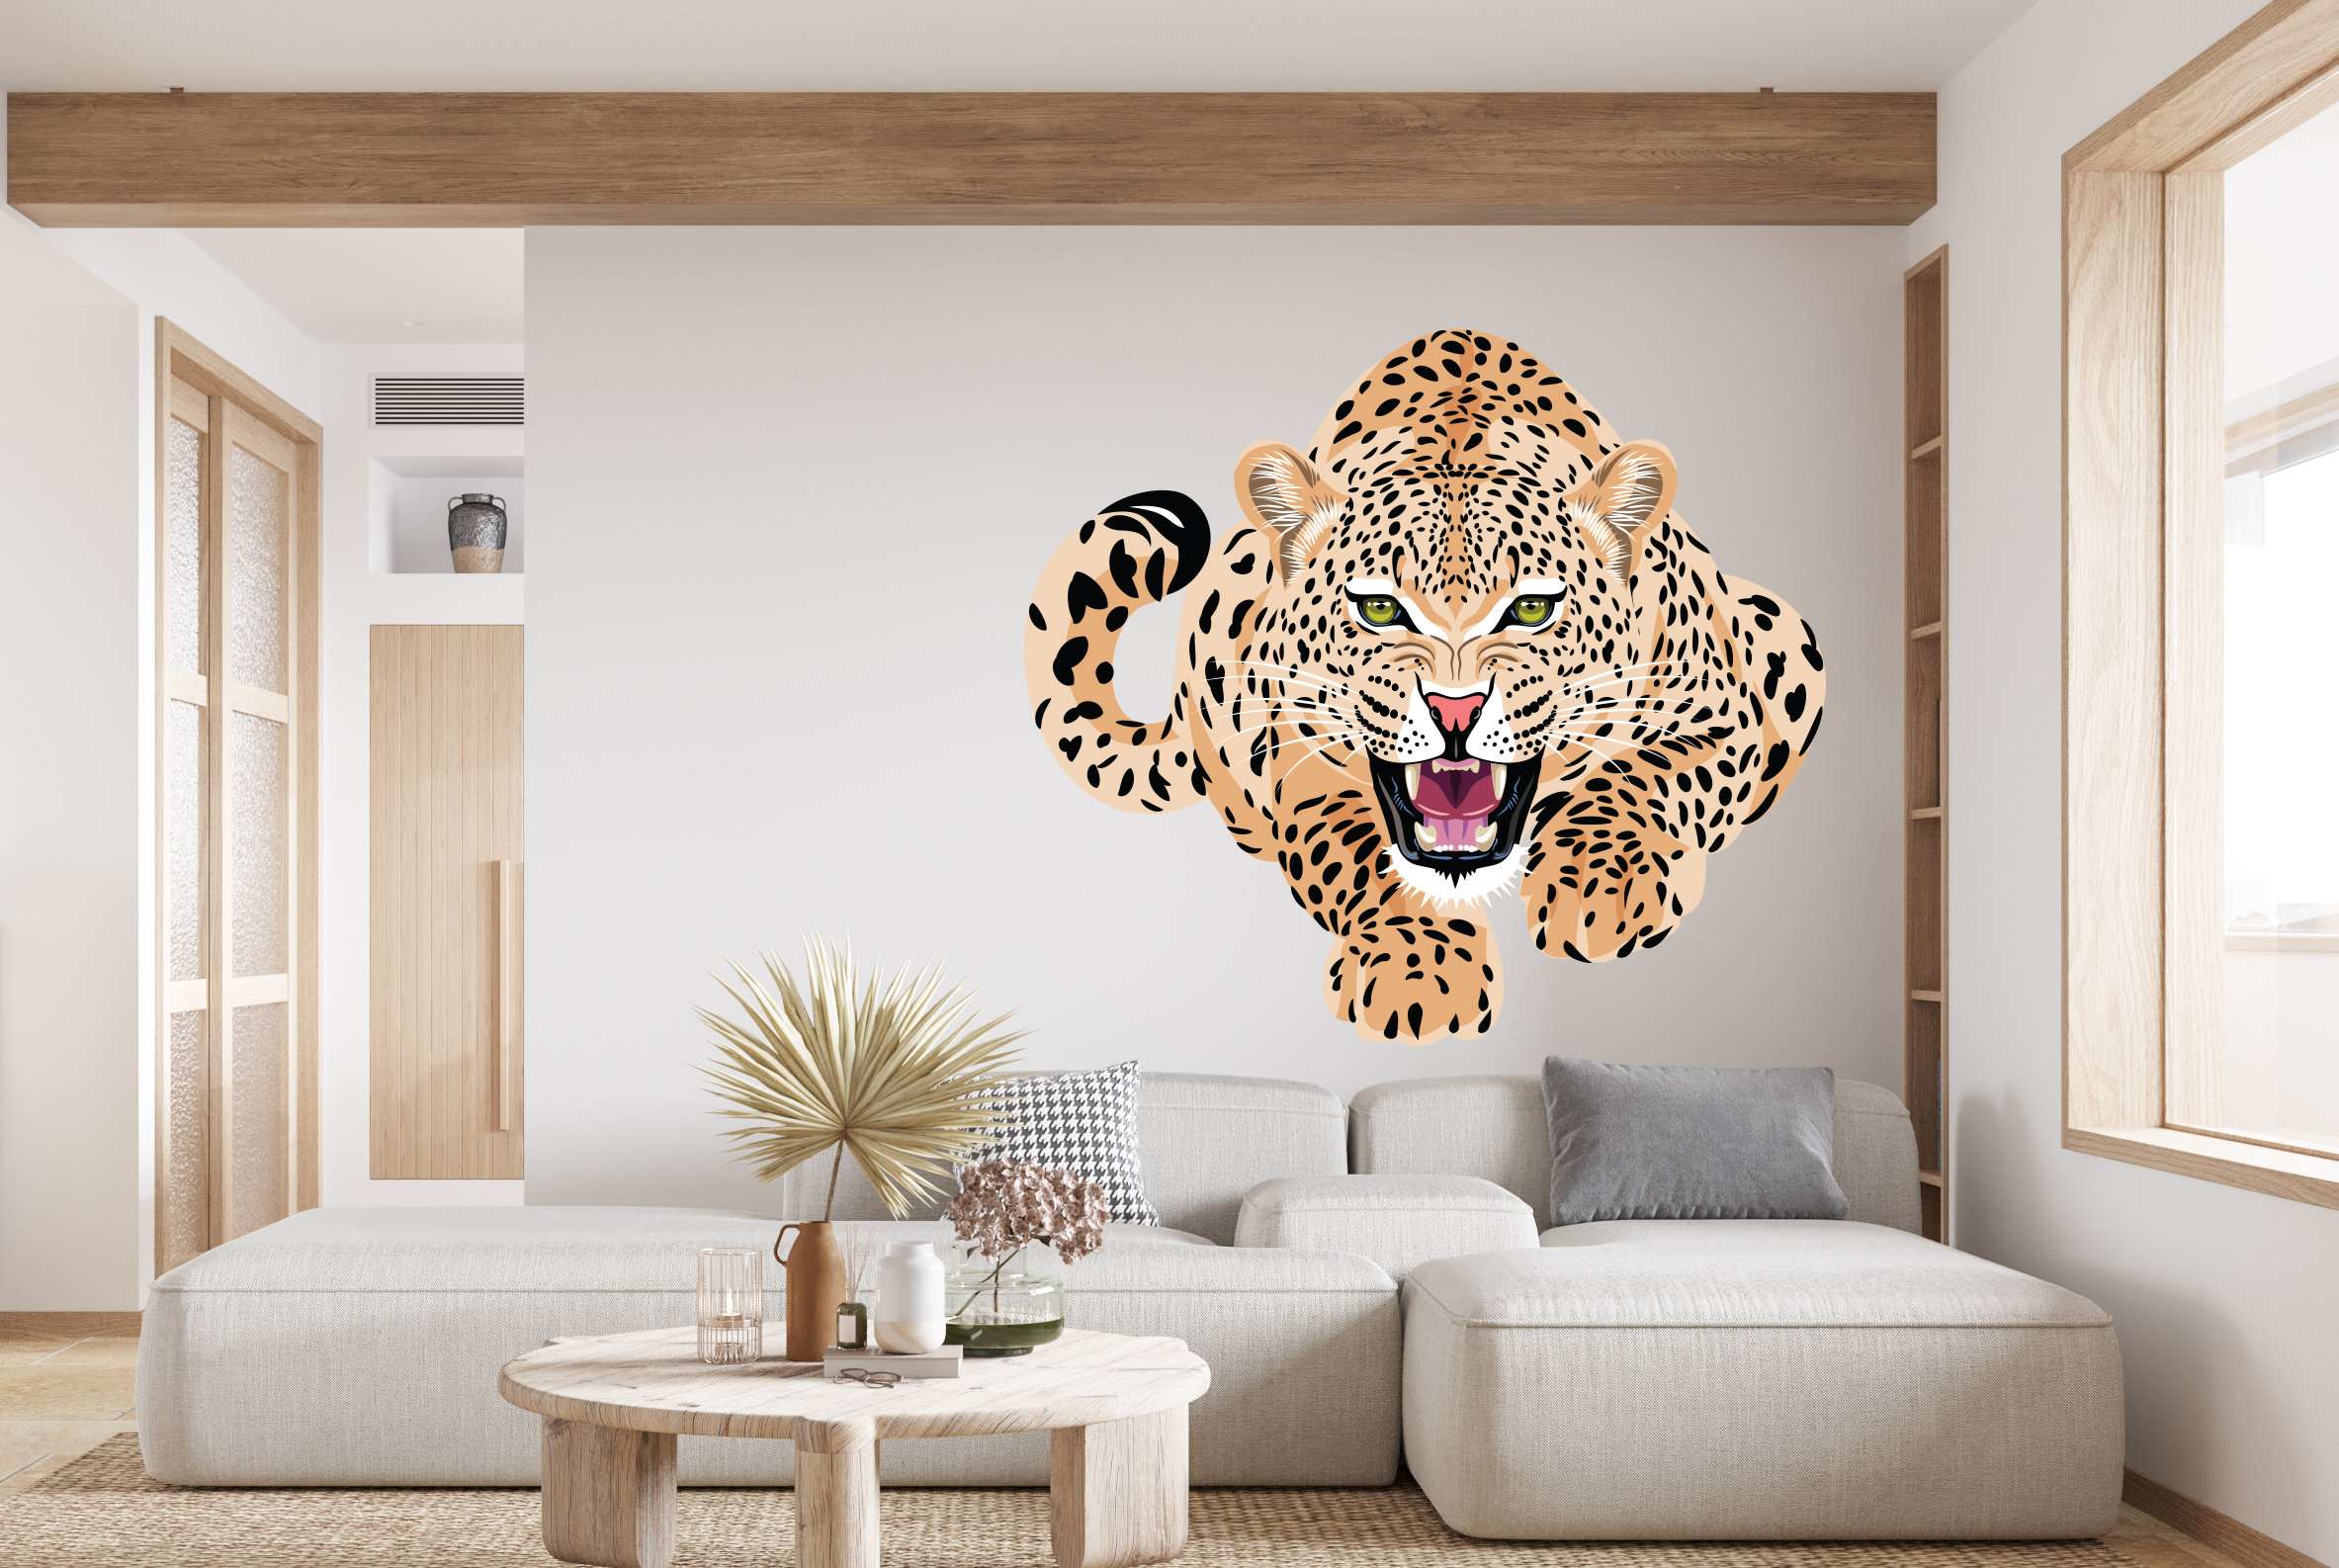 Close Up of Angry Leopard Photo Leopard Pictures Wall Decor Jungle Animal Pictures for Wall Posters of Wild Animals Jungle Leopard Print Decor Animal